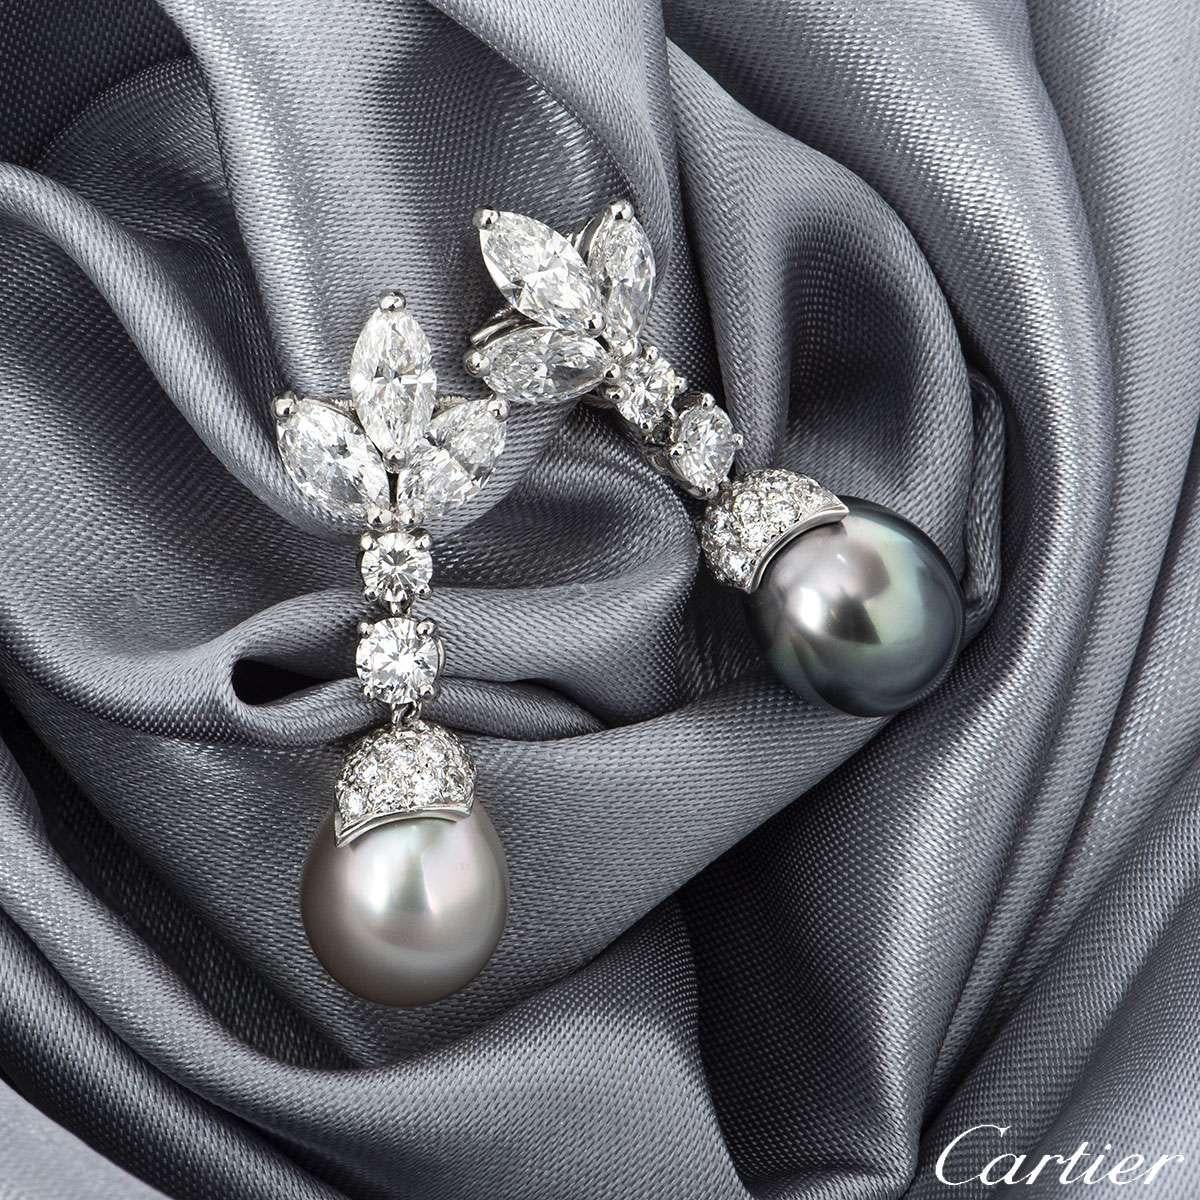 An exquisite pair of Cartier diamond and pearl earrings in platinum from the Cartier de Lune collection. Each earring features a leaf design made up of 3 marquise cut diamonds, with two subsequent round brilliant cut diamonds beneath. Suspended from